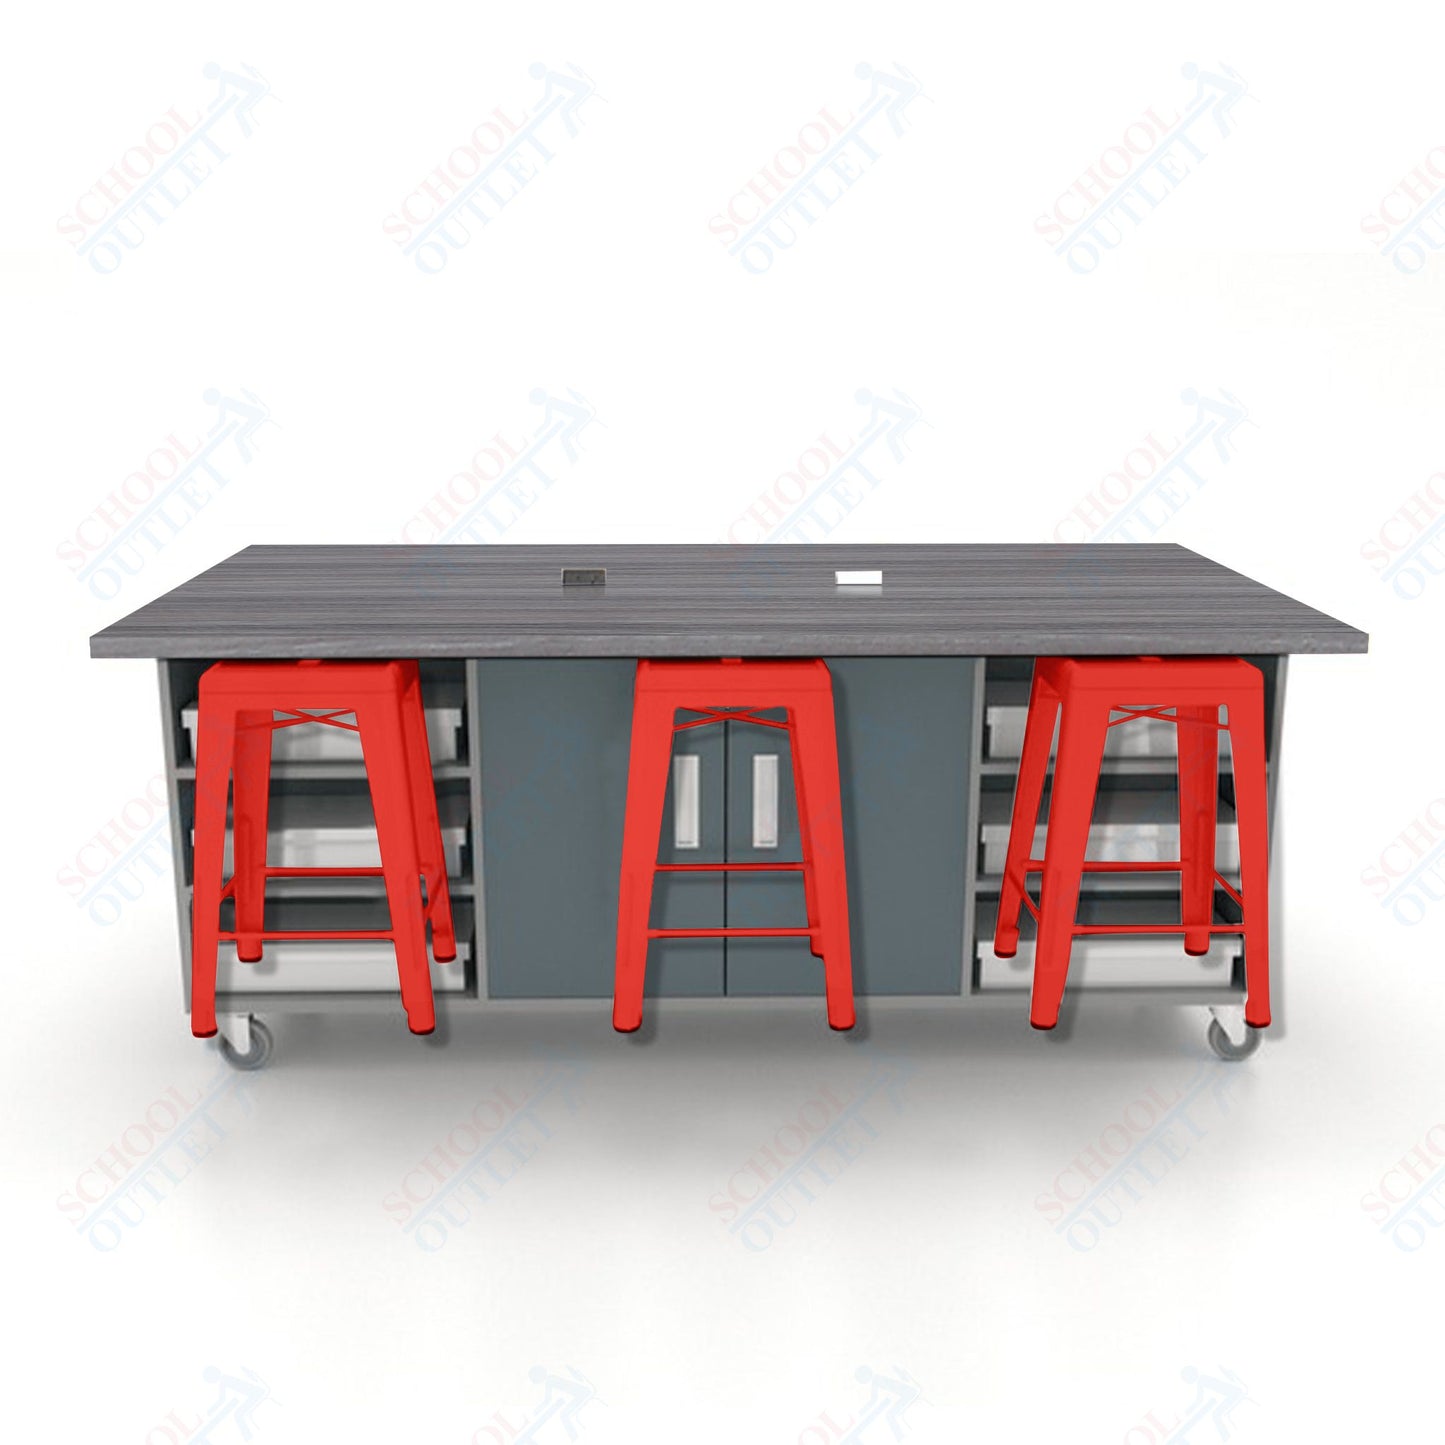 CEF ED Double Table 36"H High Pressure Laminate Top, Laminate Base with  6 Stools, Storage bins, and Electrical Outlets Included.